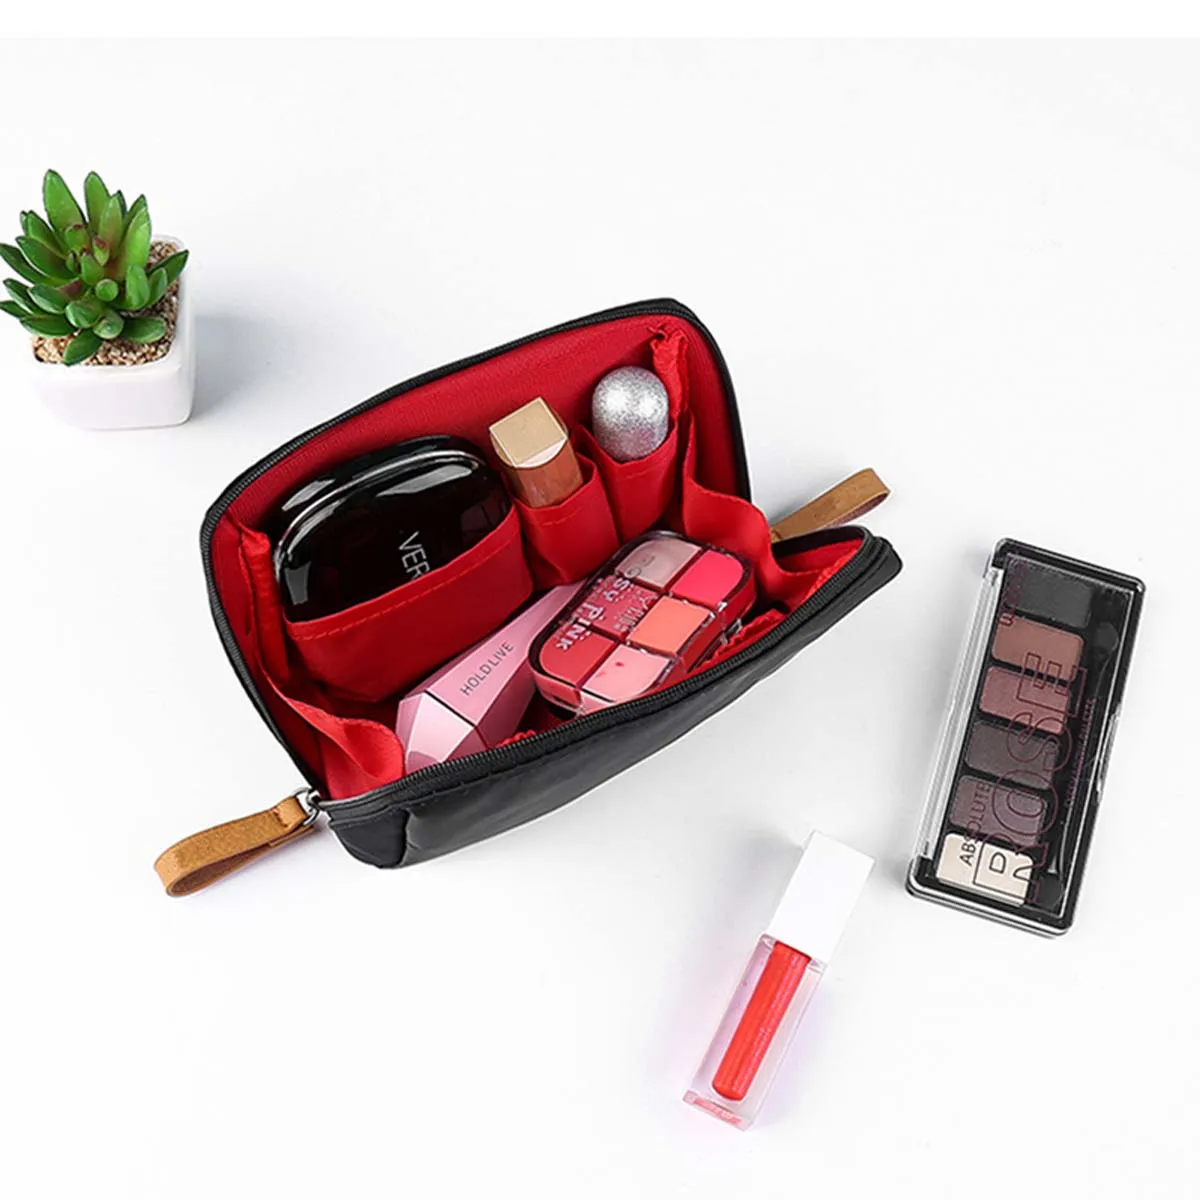 2022 New Makeup Bag Simple Solid Color Cosmetic Bag for Women Pouch Toiletry Bag Waterproof Make Up Purses Case Hot Drop-shippin